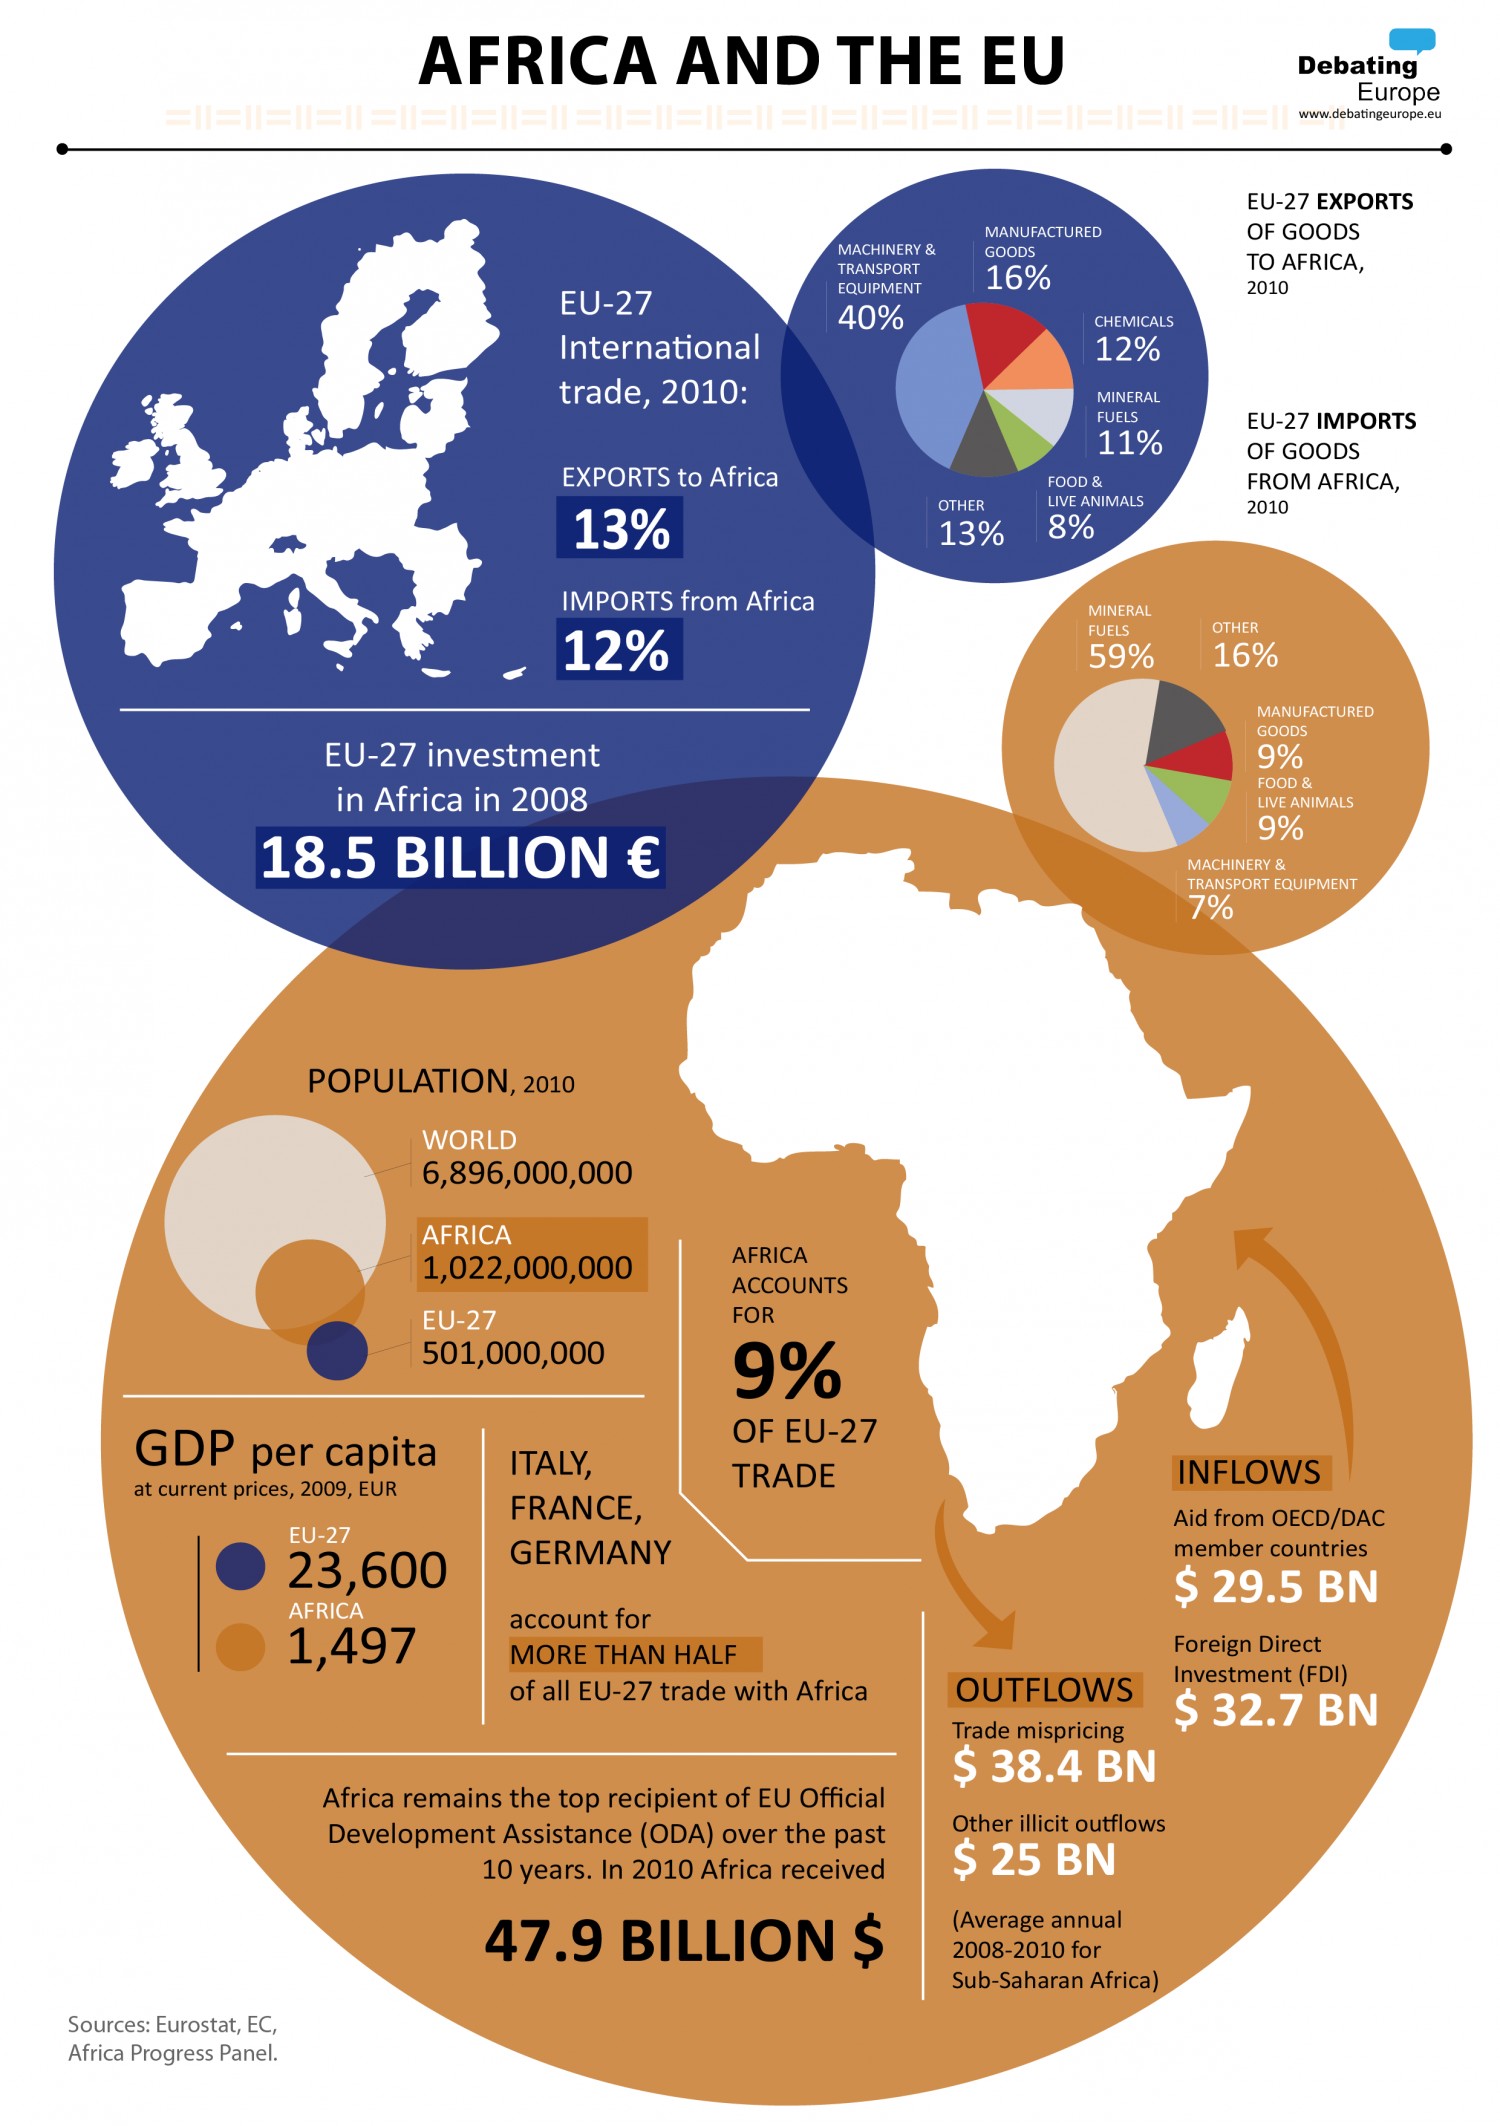 Africa and the EU